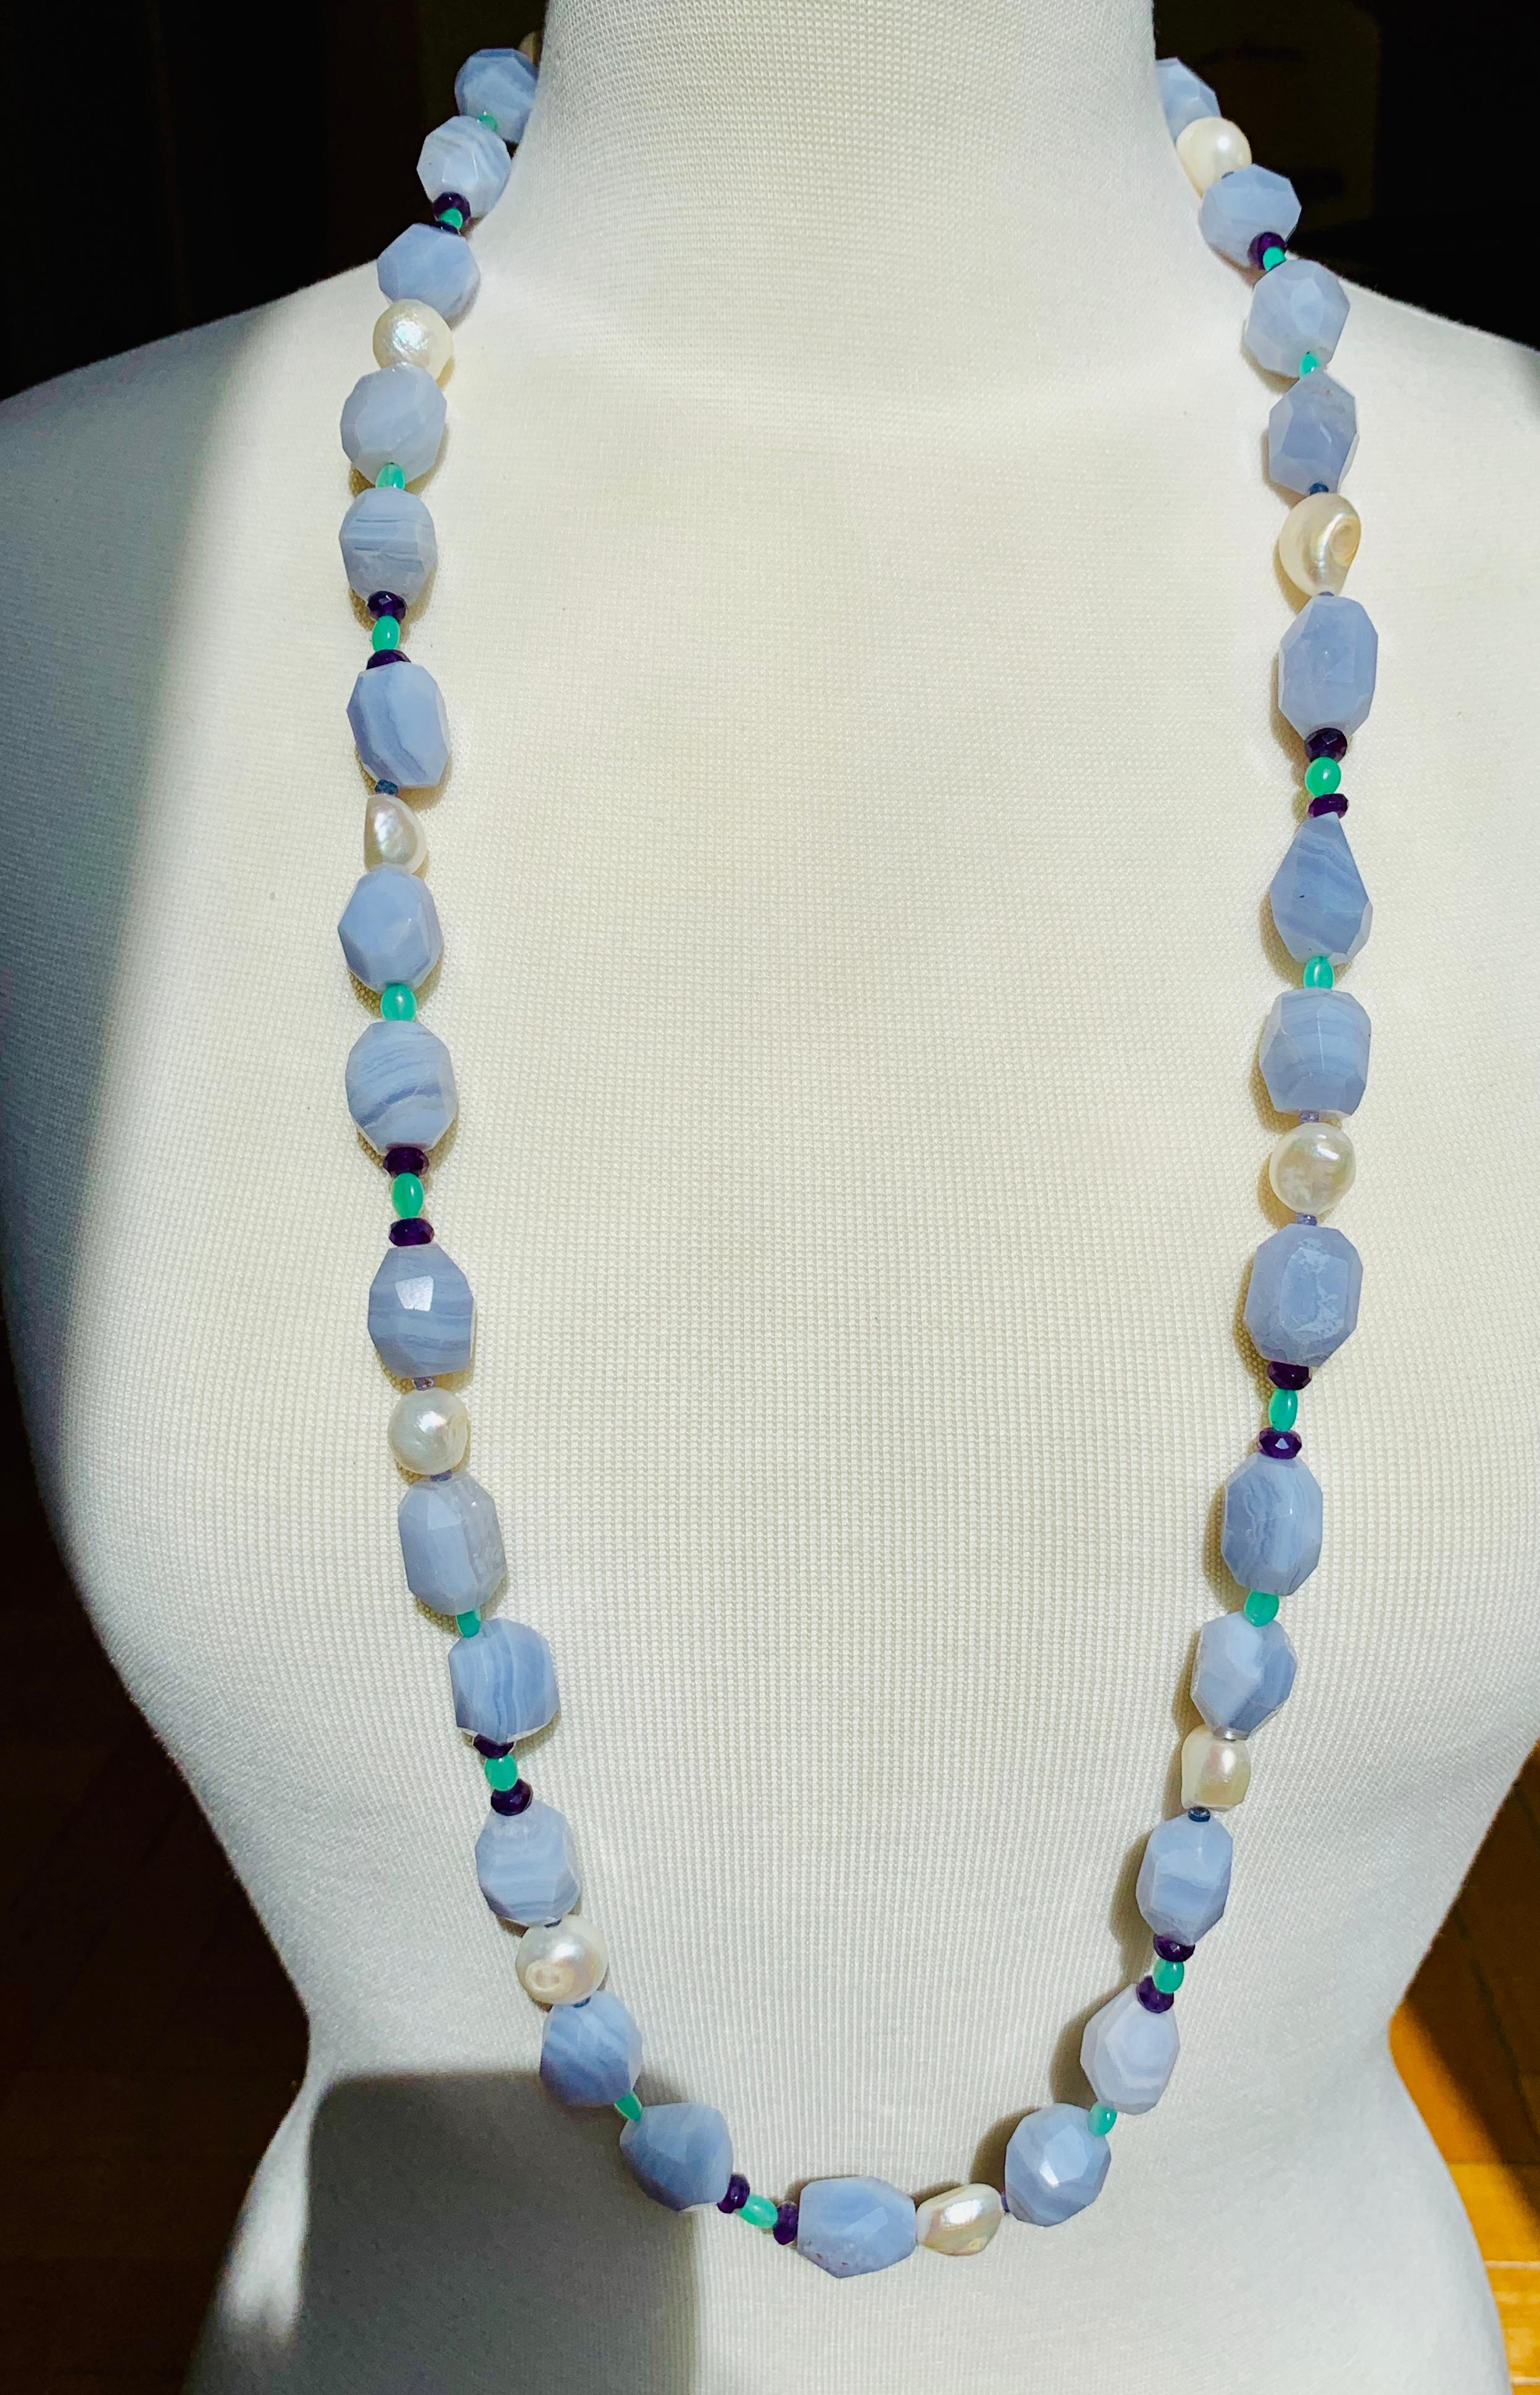 Blue Lace Agate Necklace with Chrysoprase and Amethyst For Sale at 1stDibs